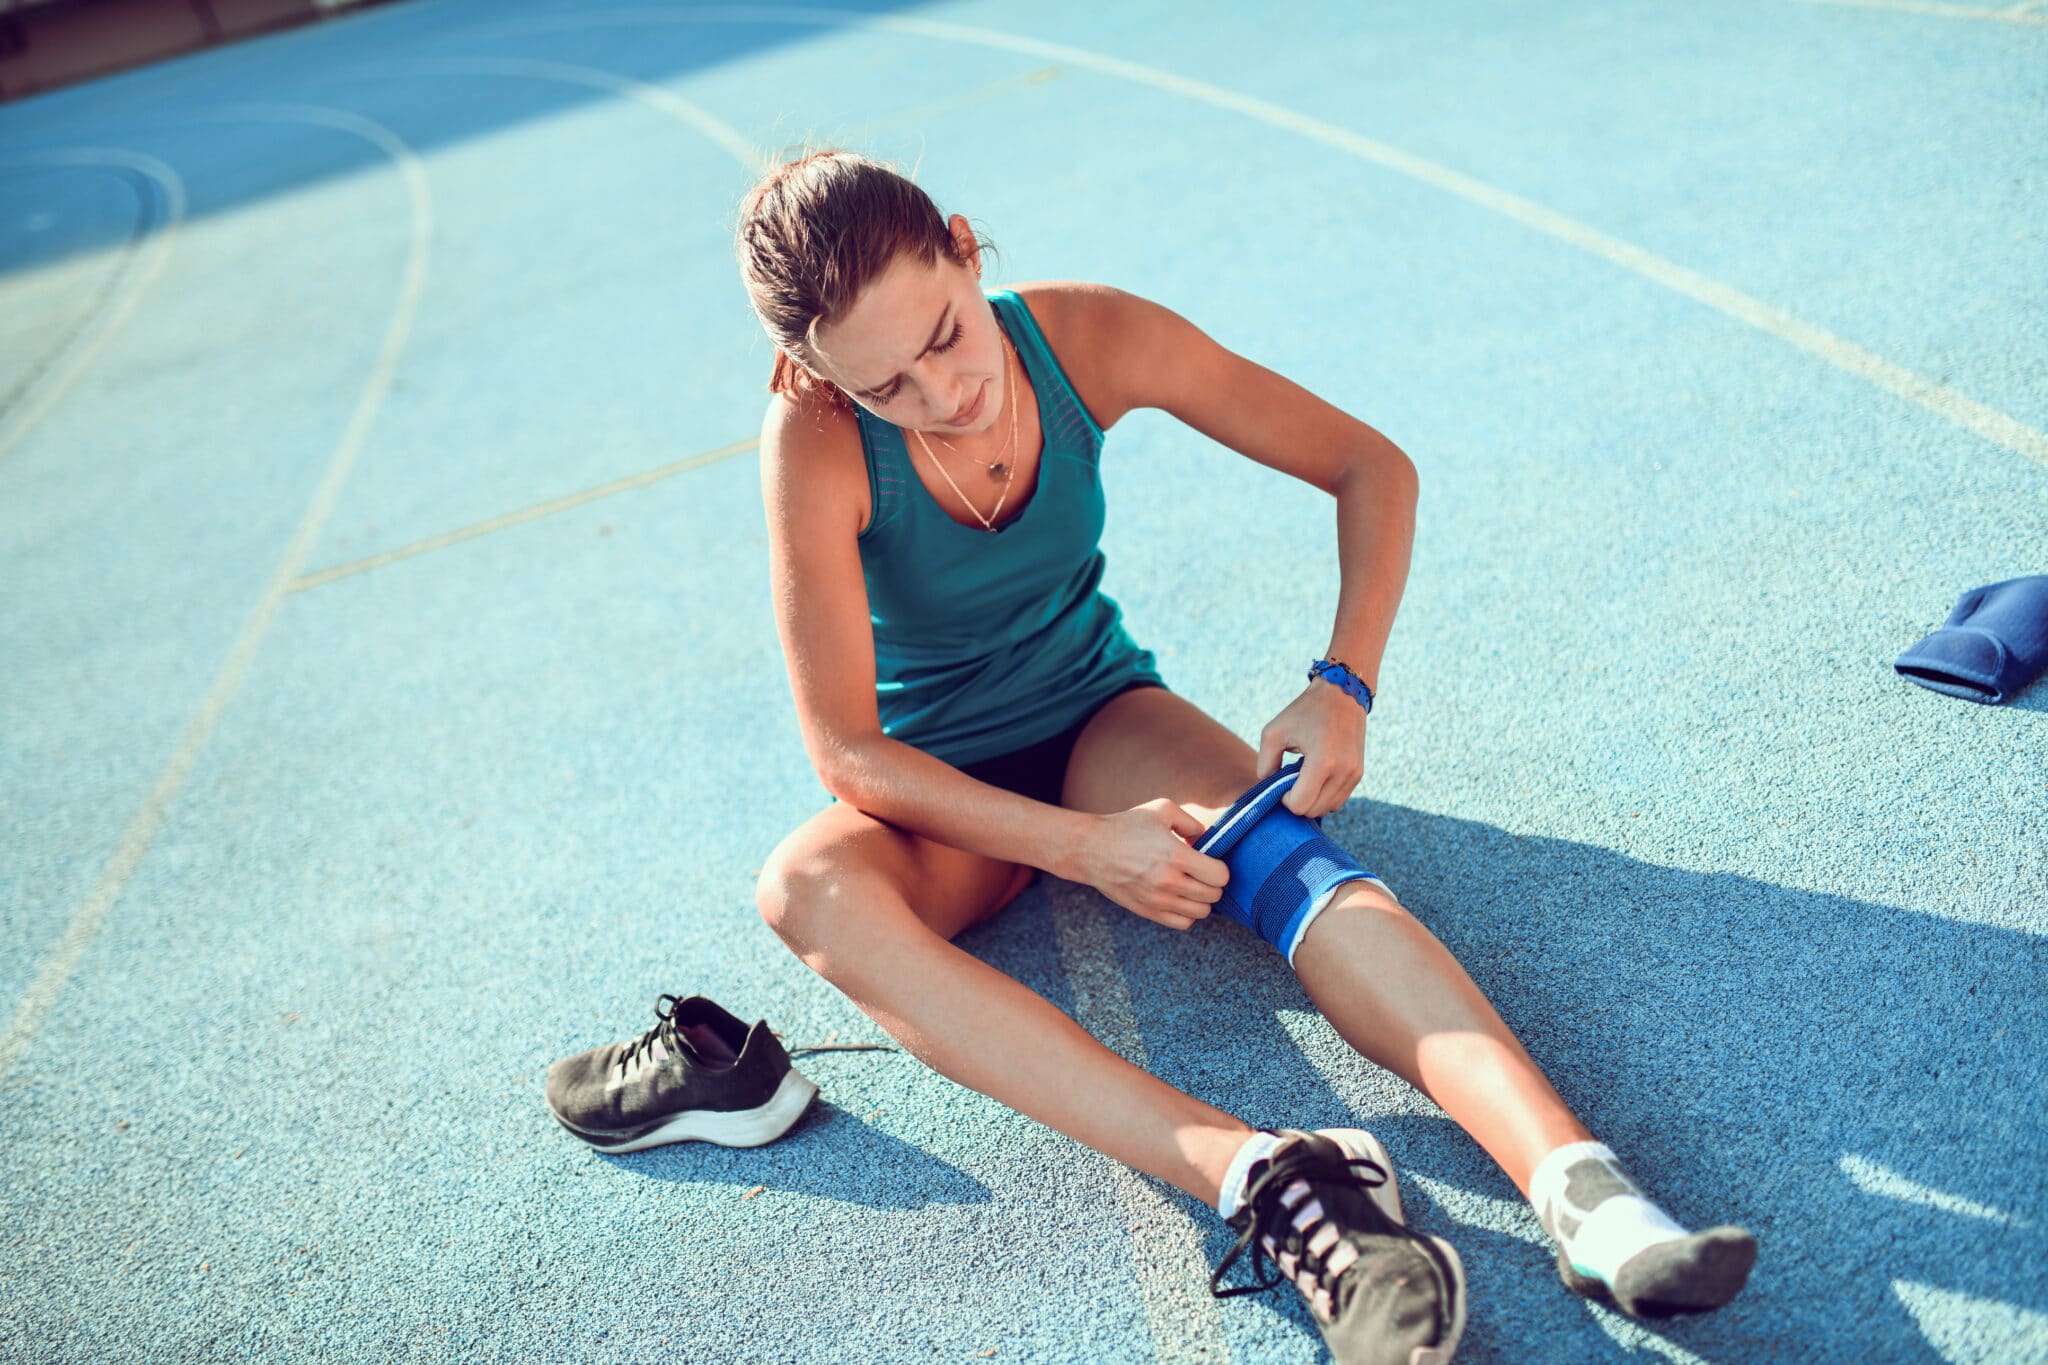 Does ACL Tear Hurt All the Time?